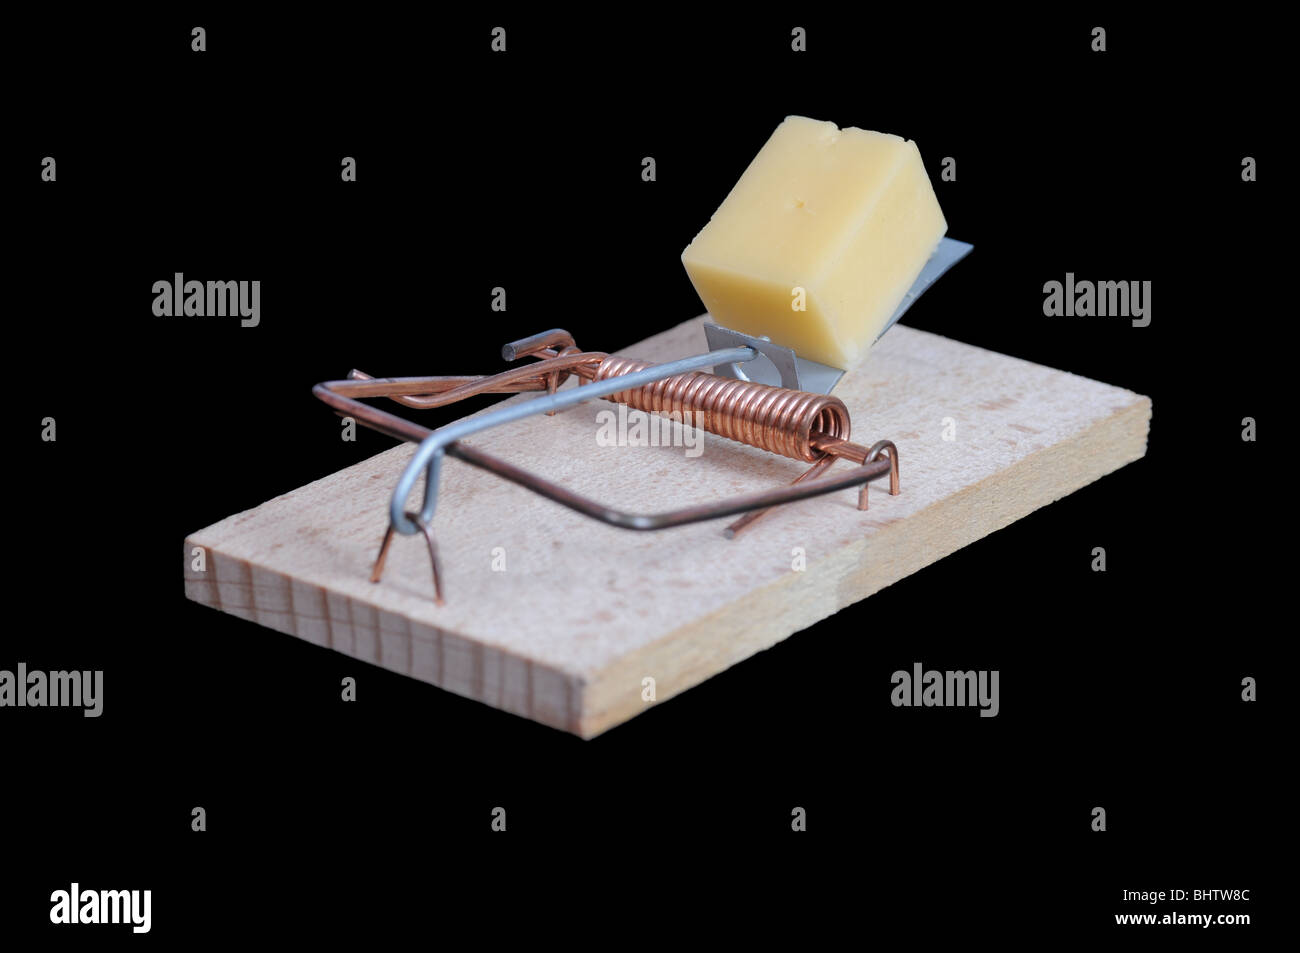 Mousetrap with a piece of cheese on black background. Stock Photo